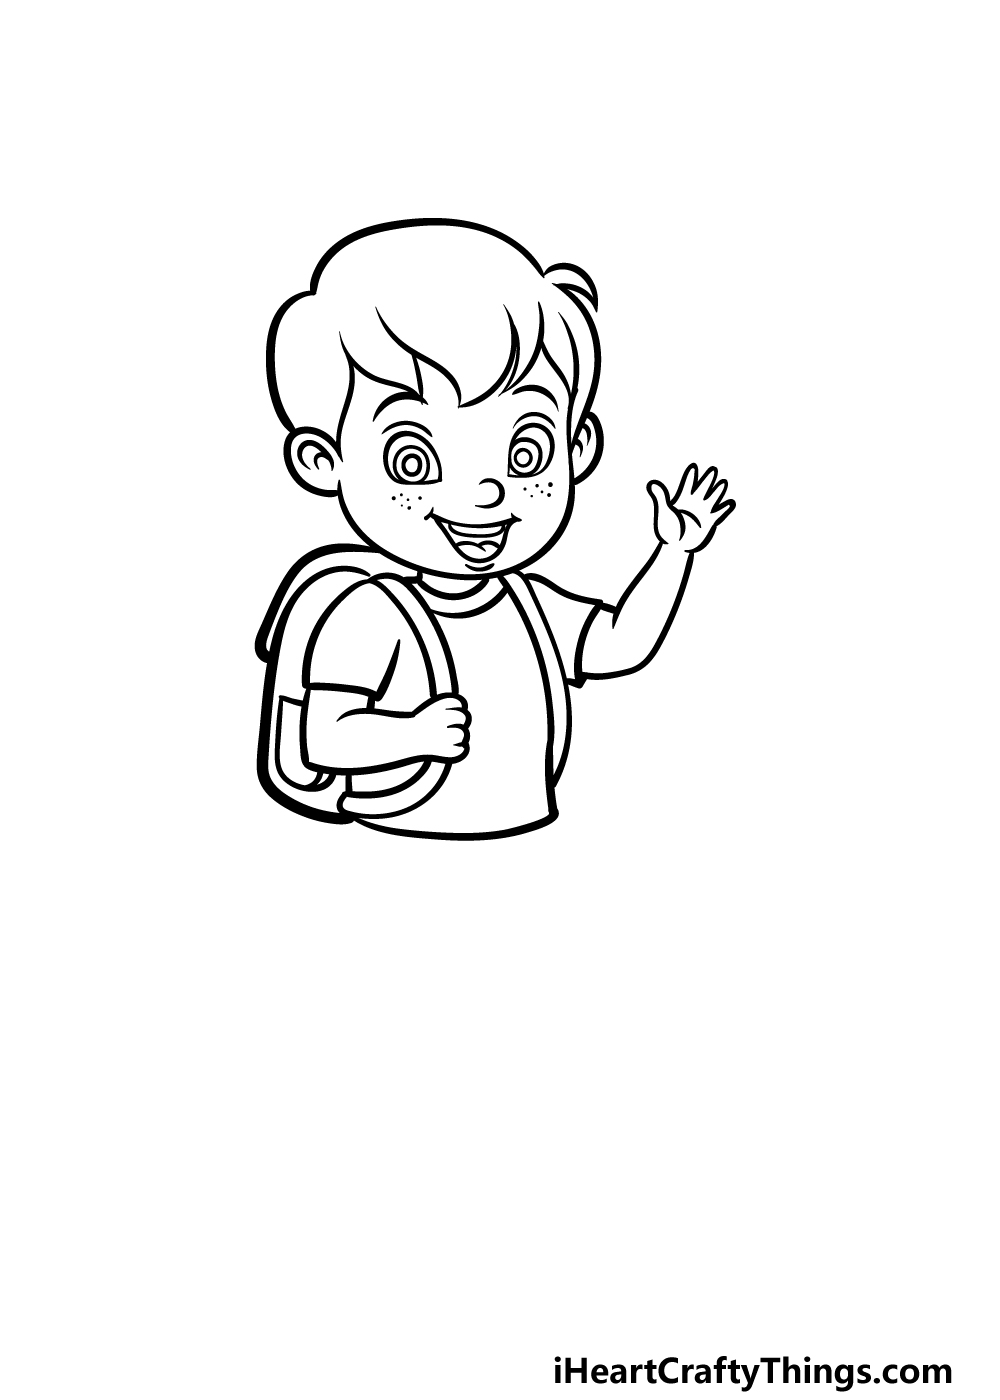 Easy How to draw a Boy and Boy Coloring Page-saigonsouth.com.vn